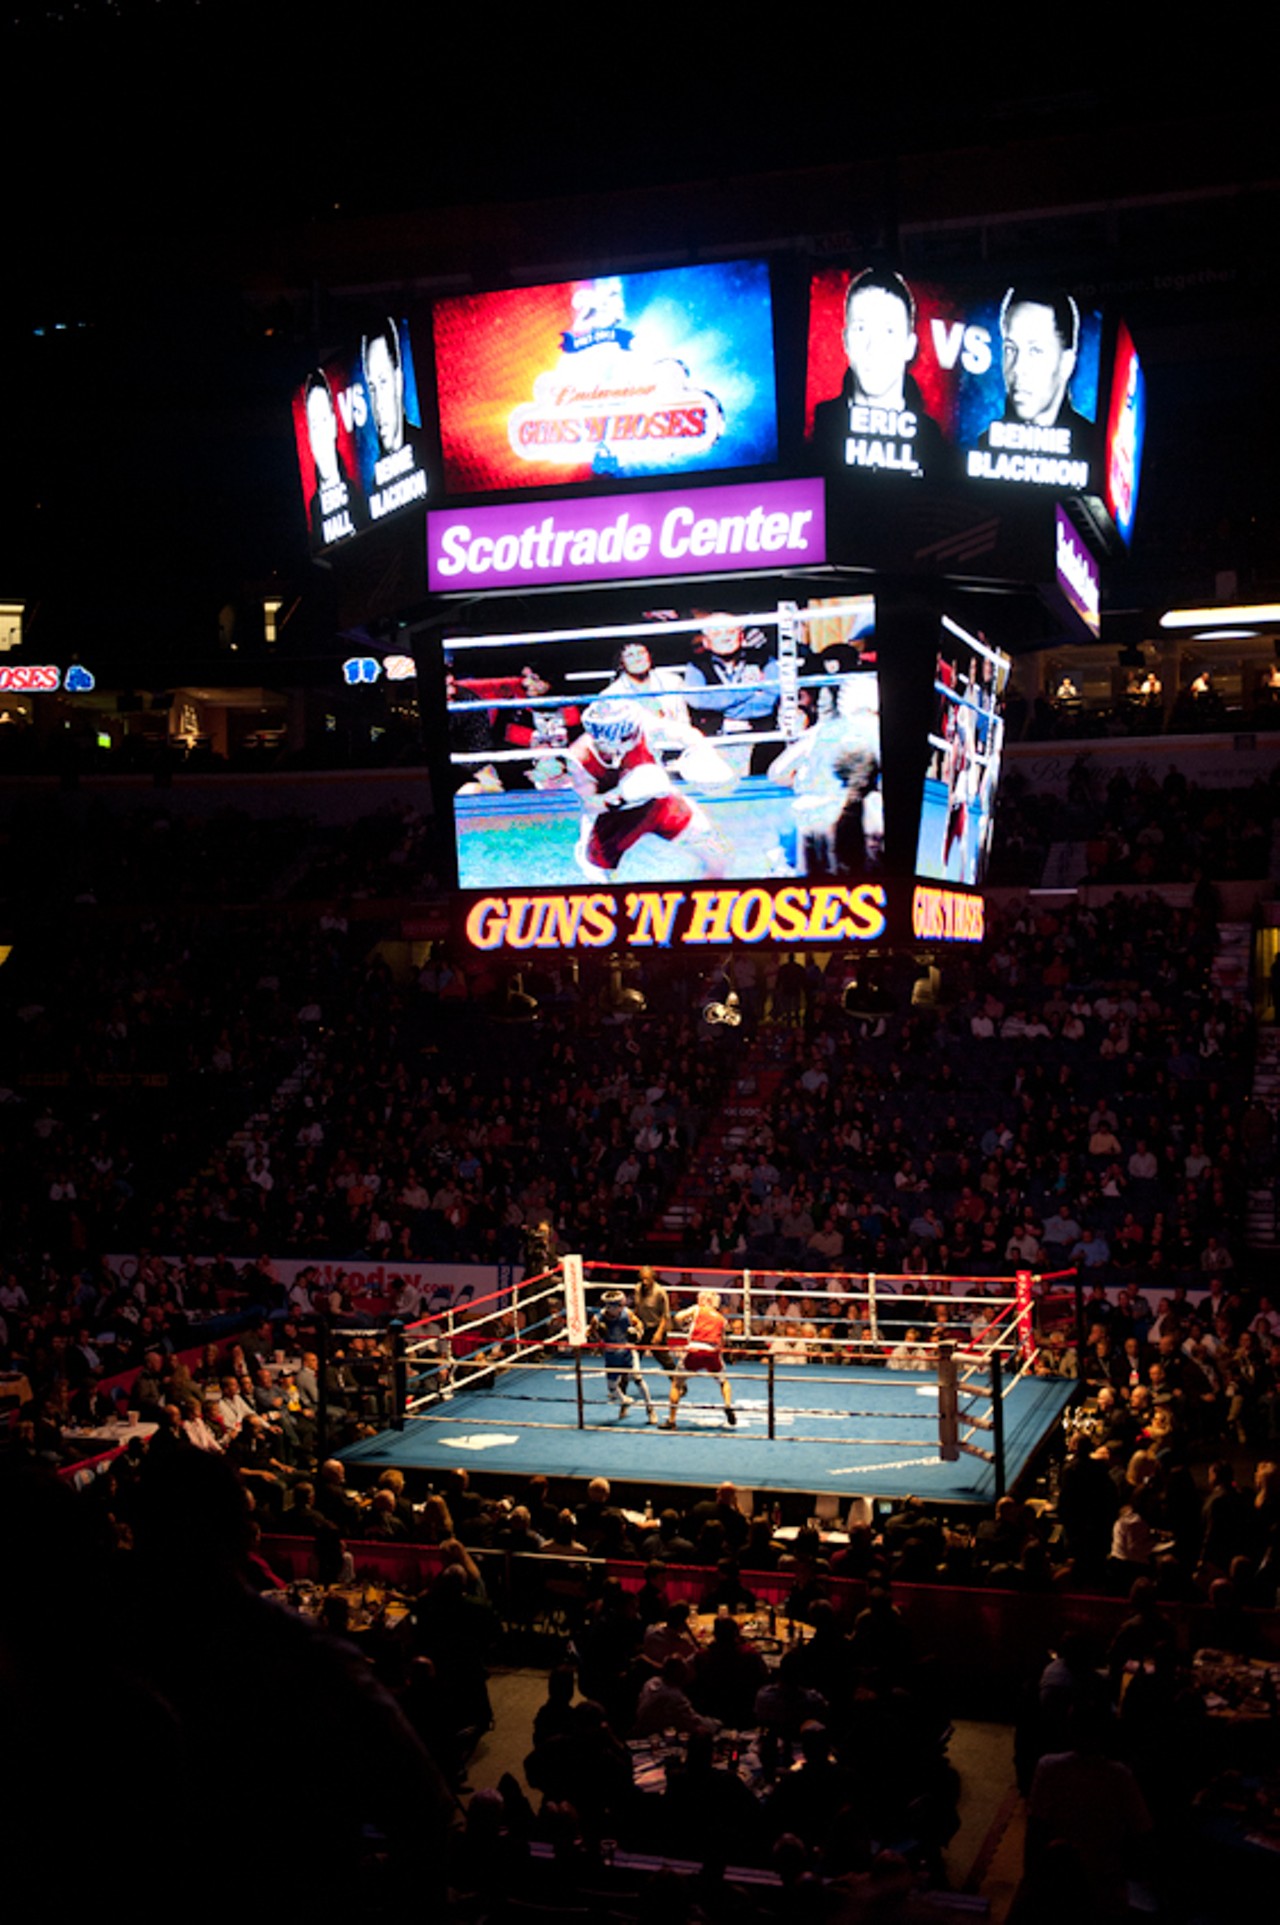 A view from the crowd for  Guns 'N' Hoses.